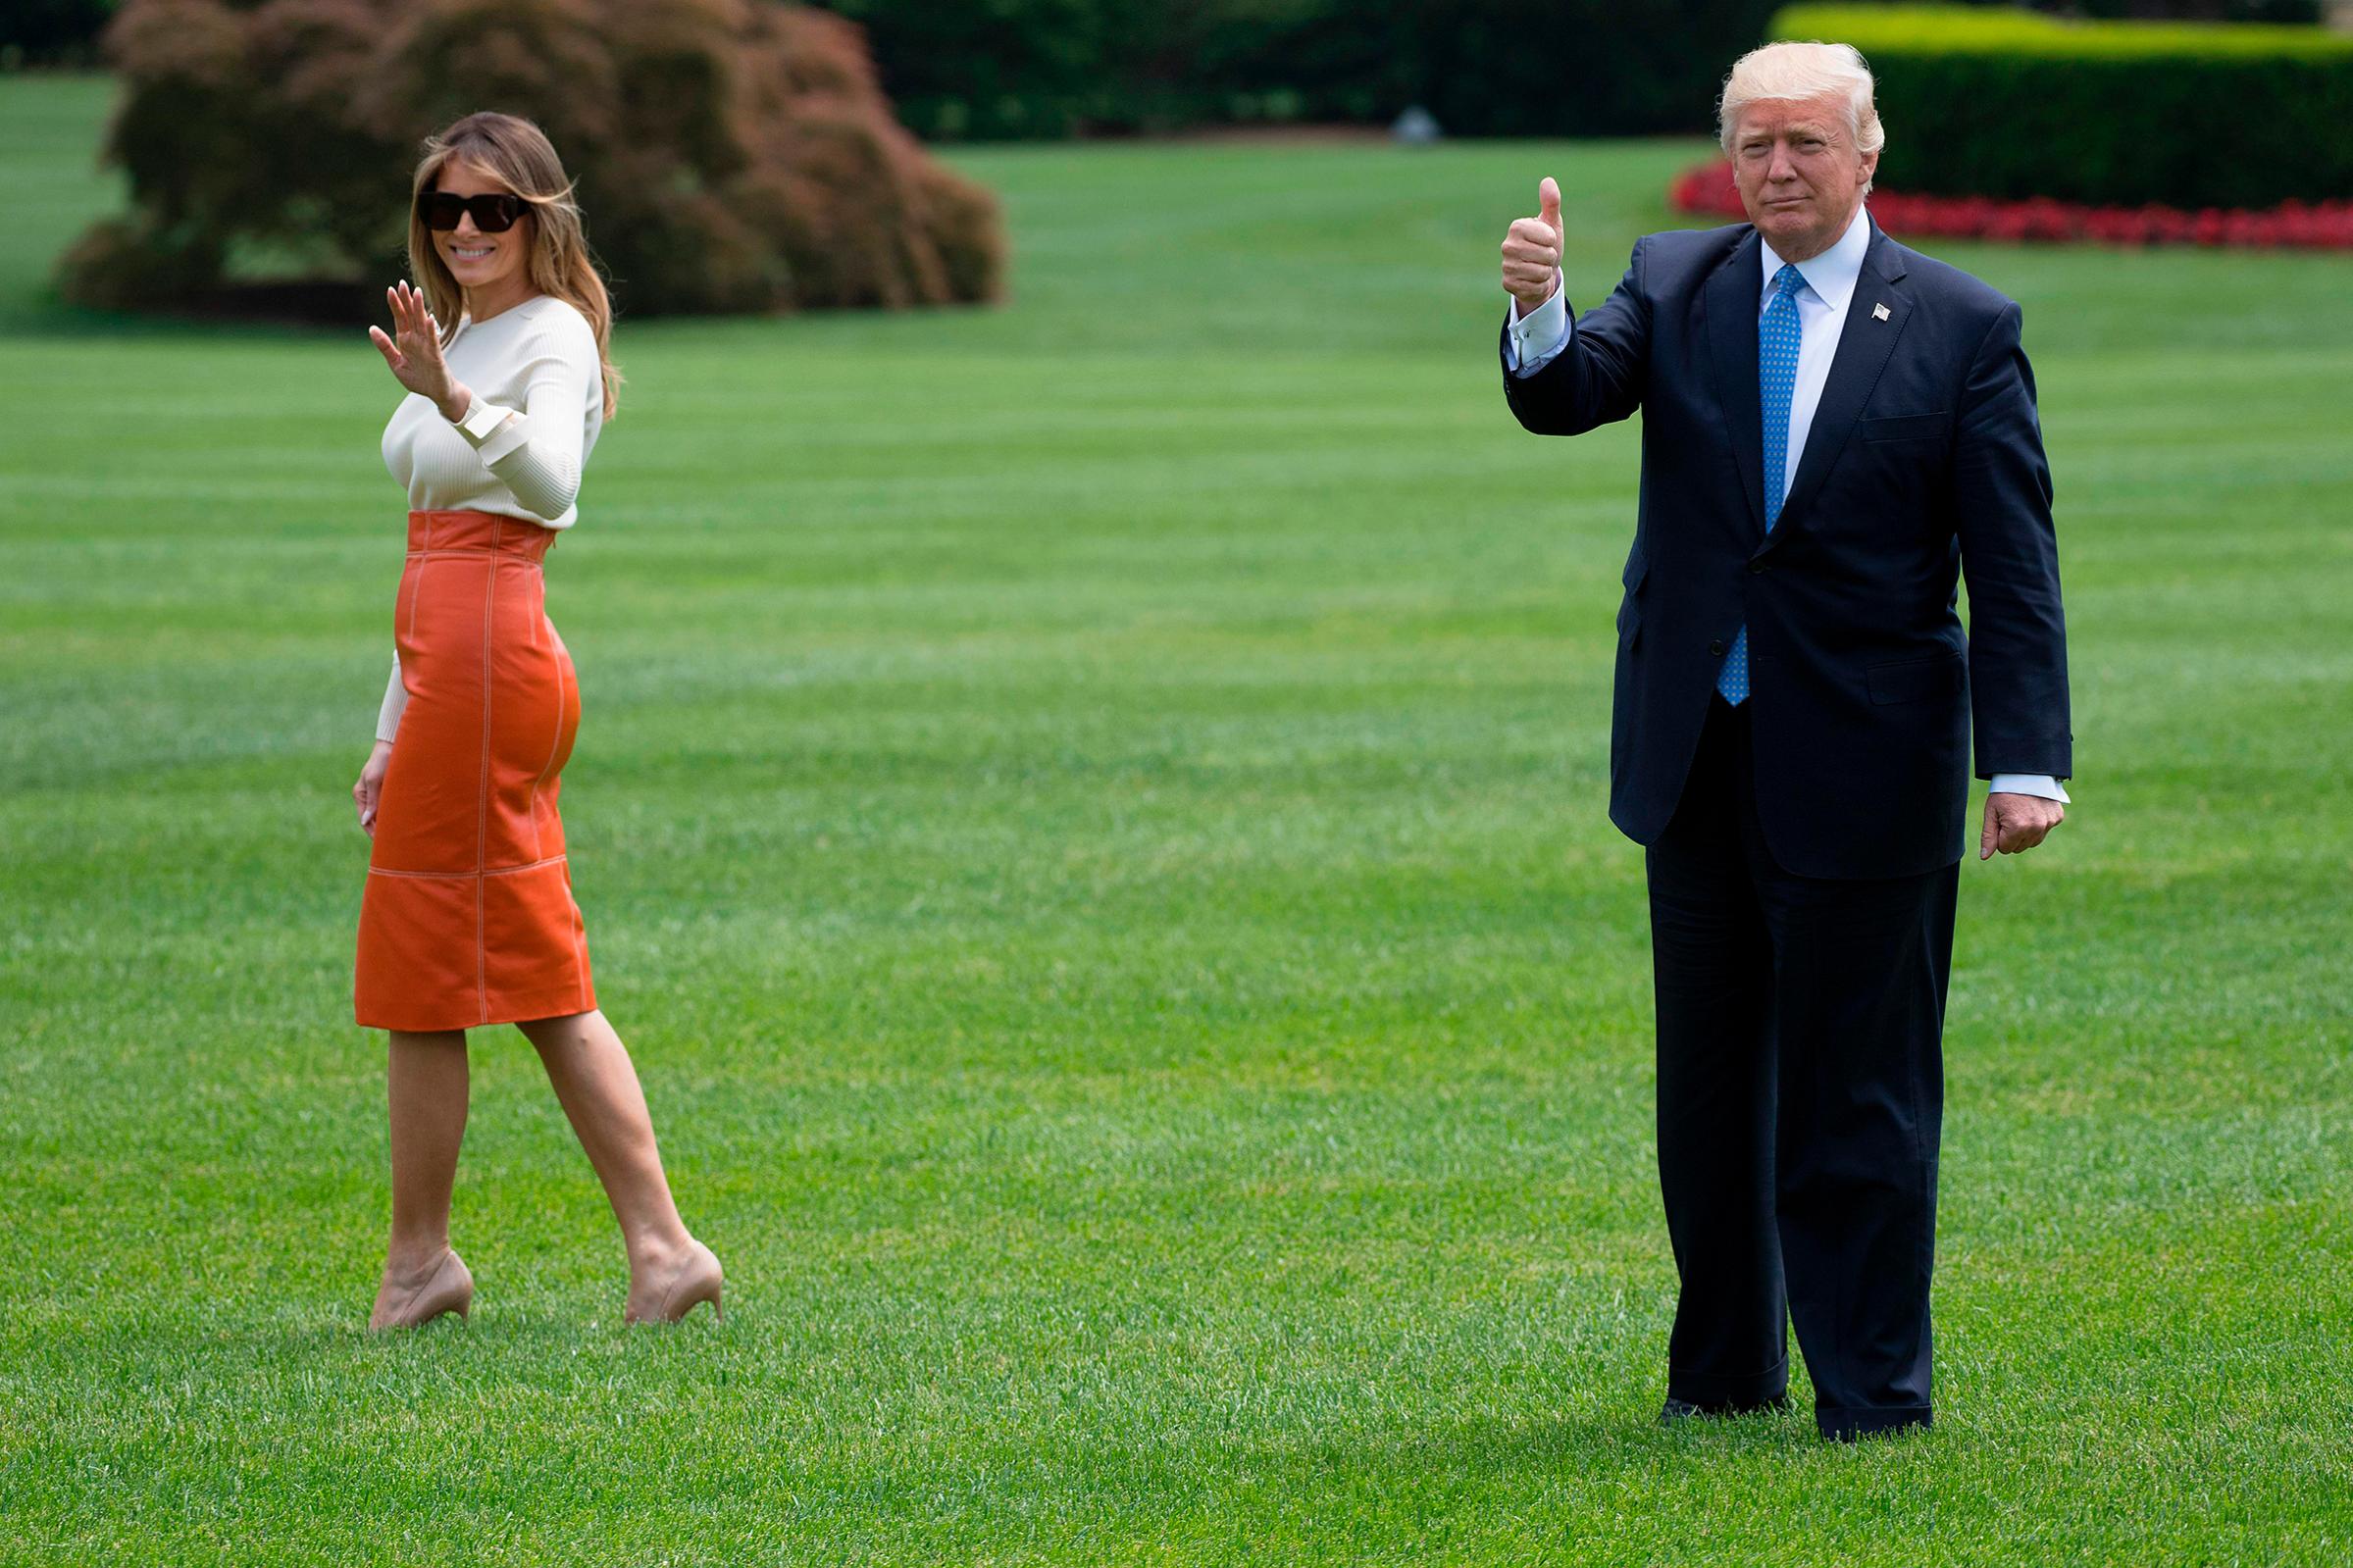 President Donald Trump (R) gives a thumbs up as he and First Lady Melania Trump wearing a Max Mara sweater and Hervé Pierre leather skirt, depart the White House in Washington, DC, May 19, 2017.